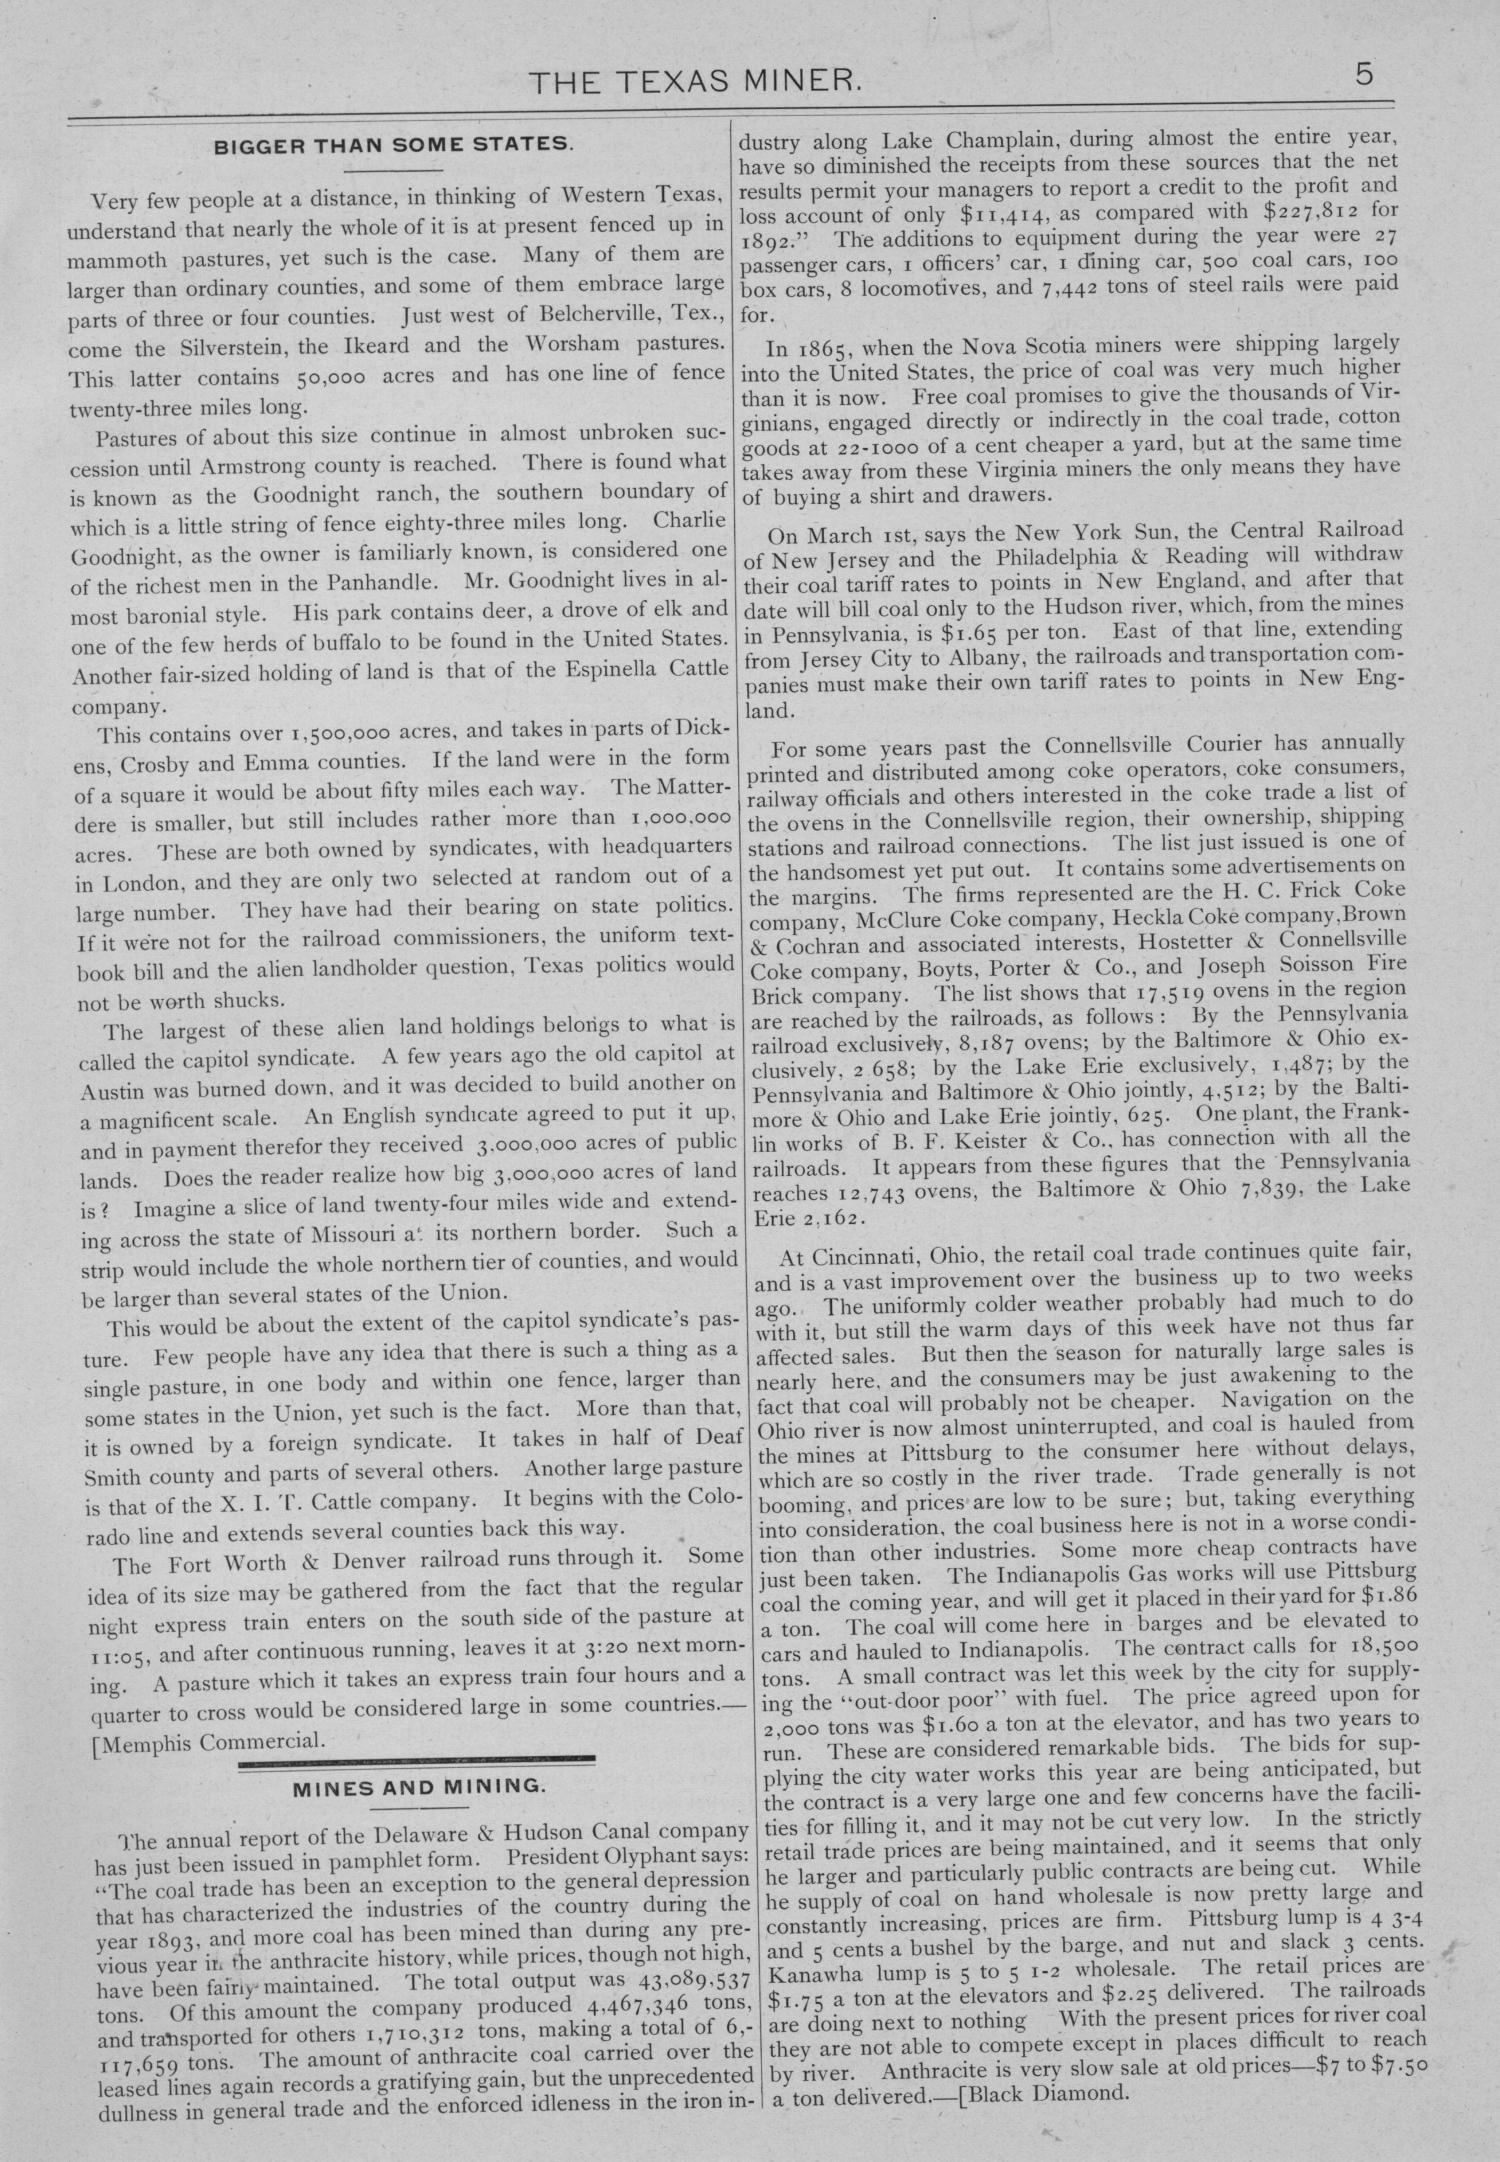 The Texas Miner, Volume 1, Number 10, March 24, 1894
                                                
                                                    5
                                                